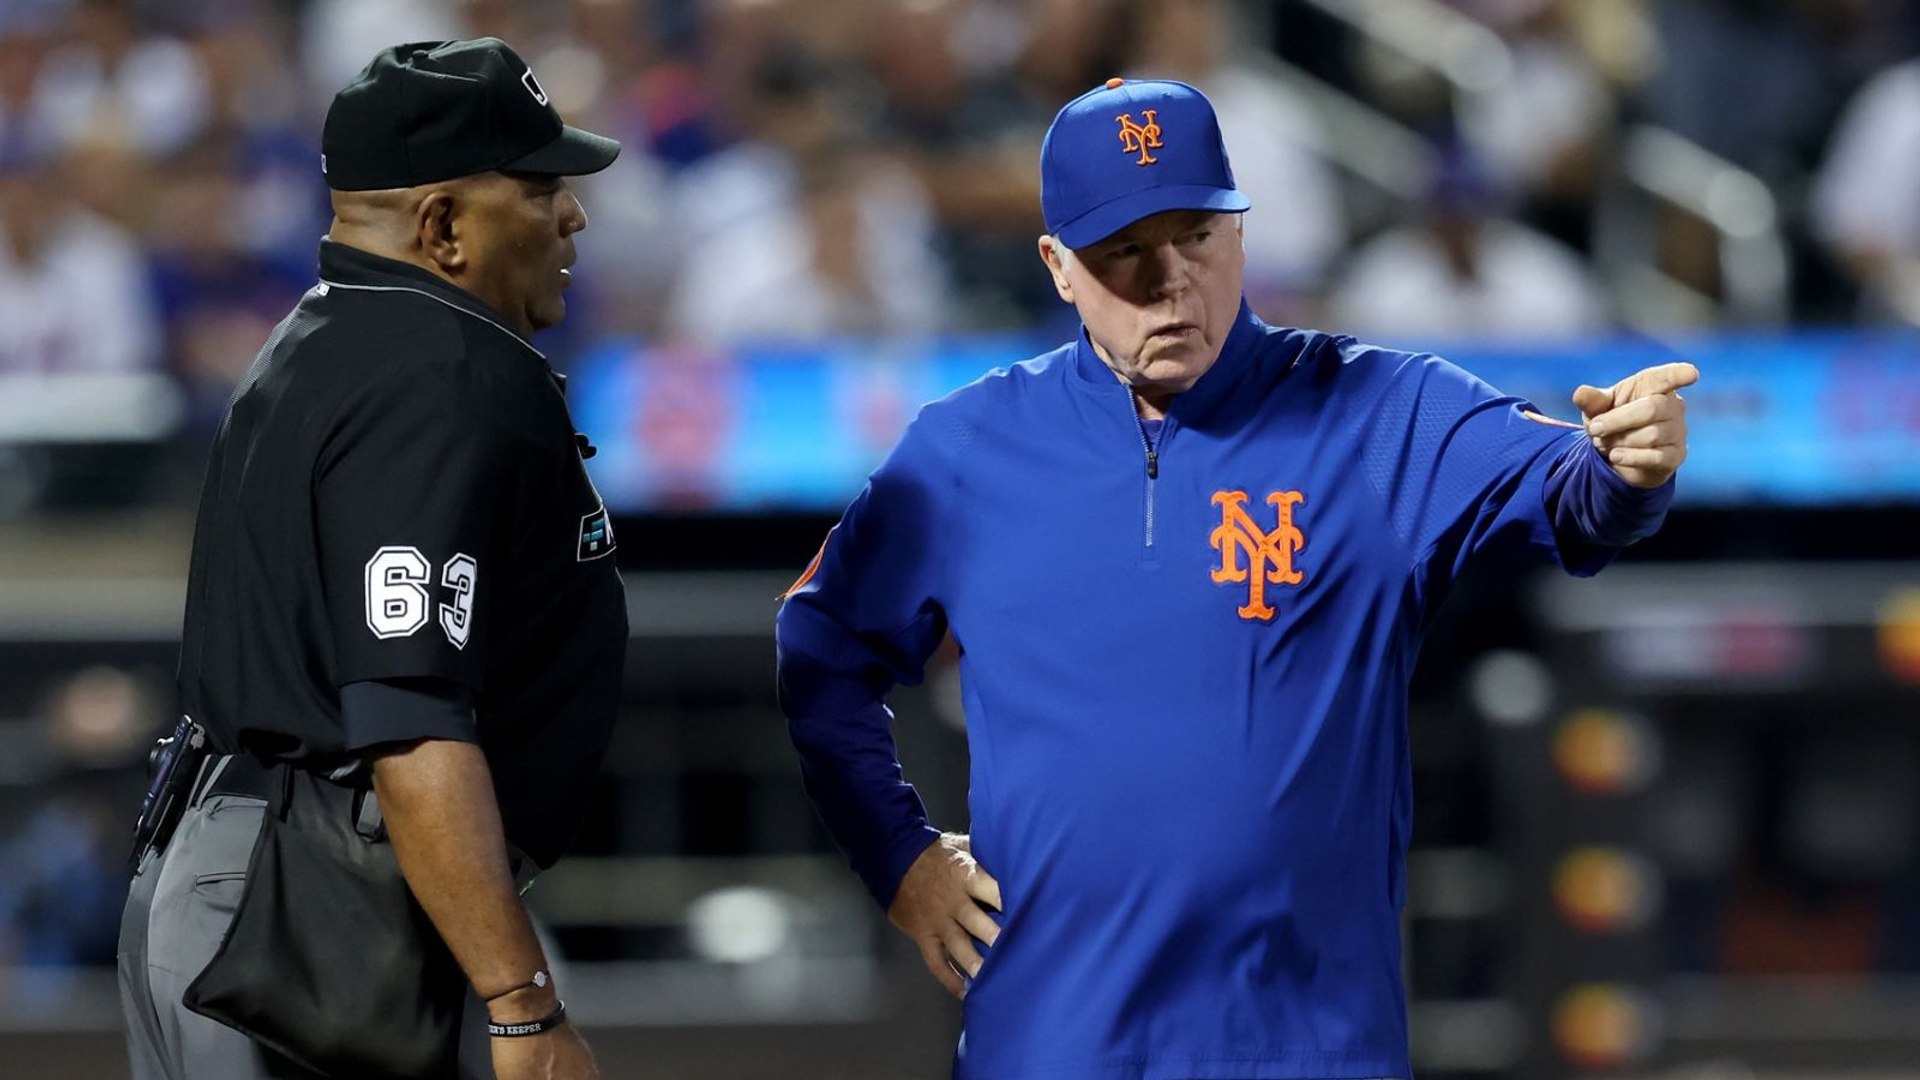 The New York Mets Are Utter Failures Says Scott and Mike! - video